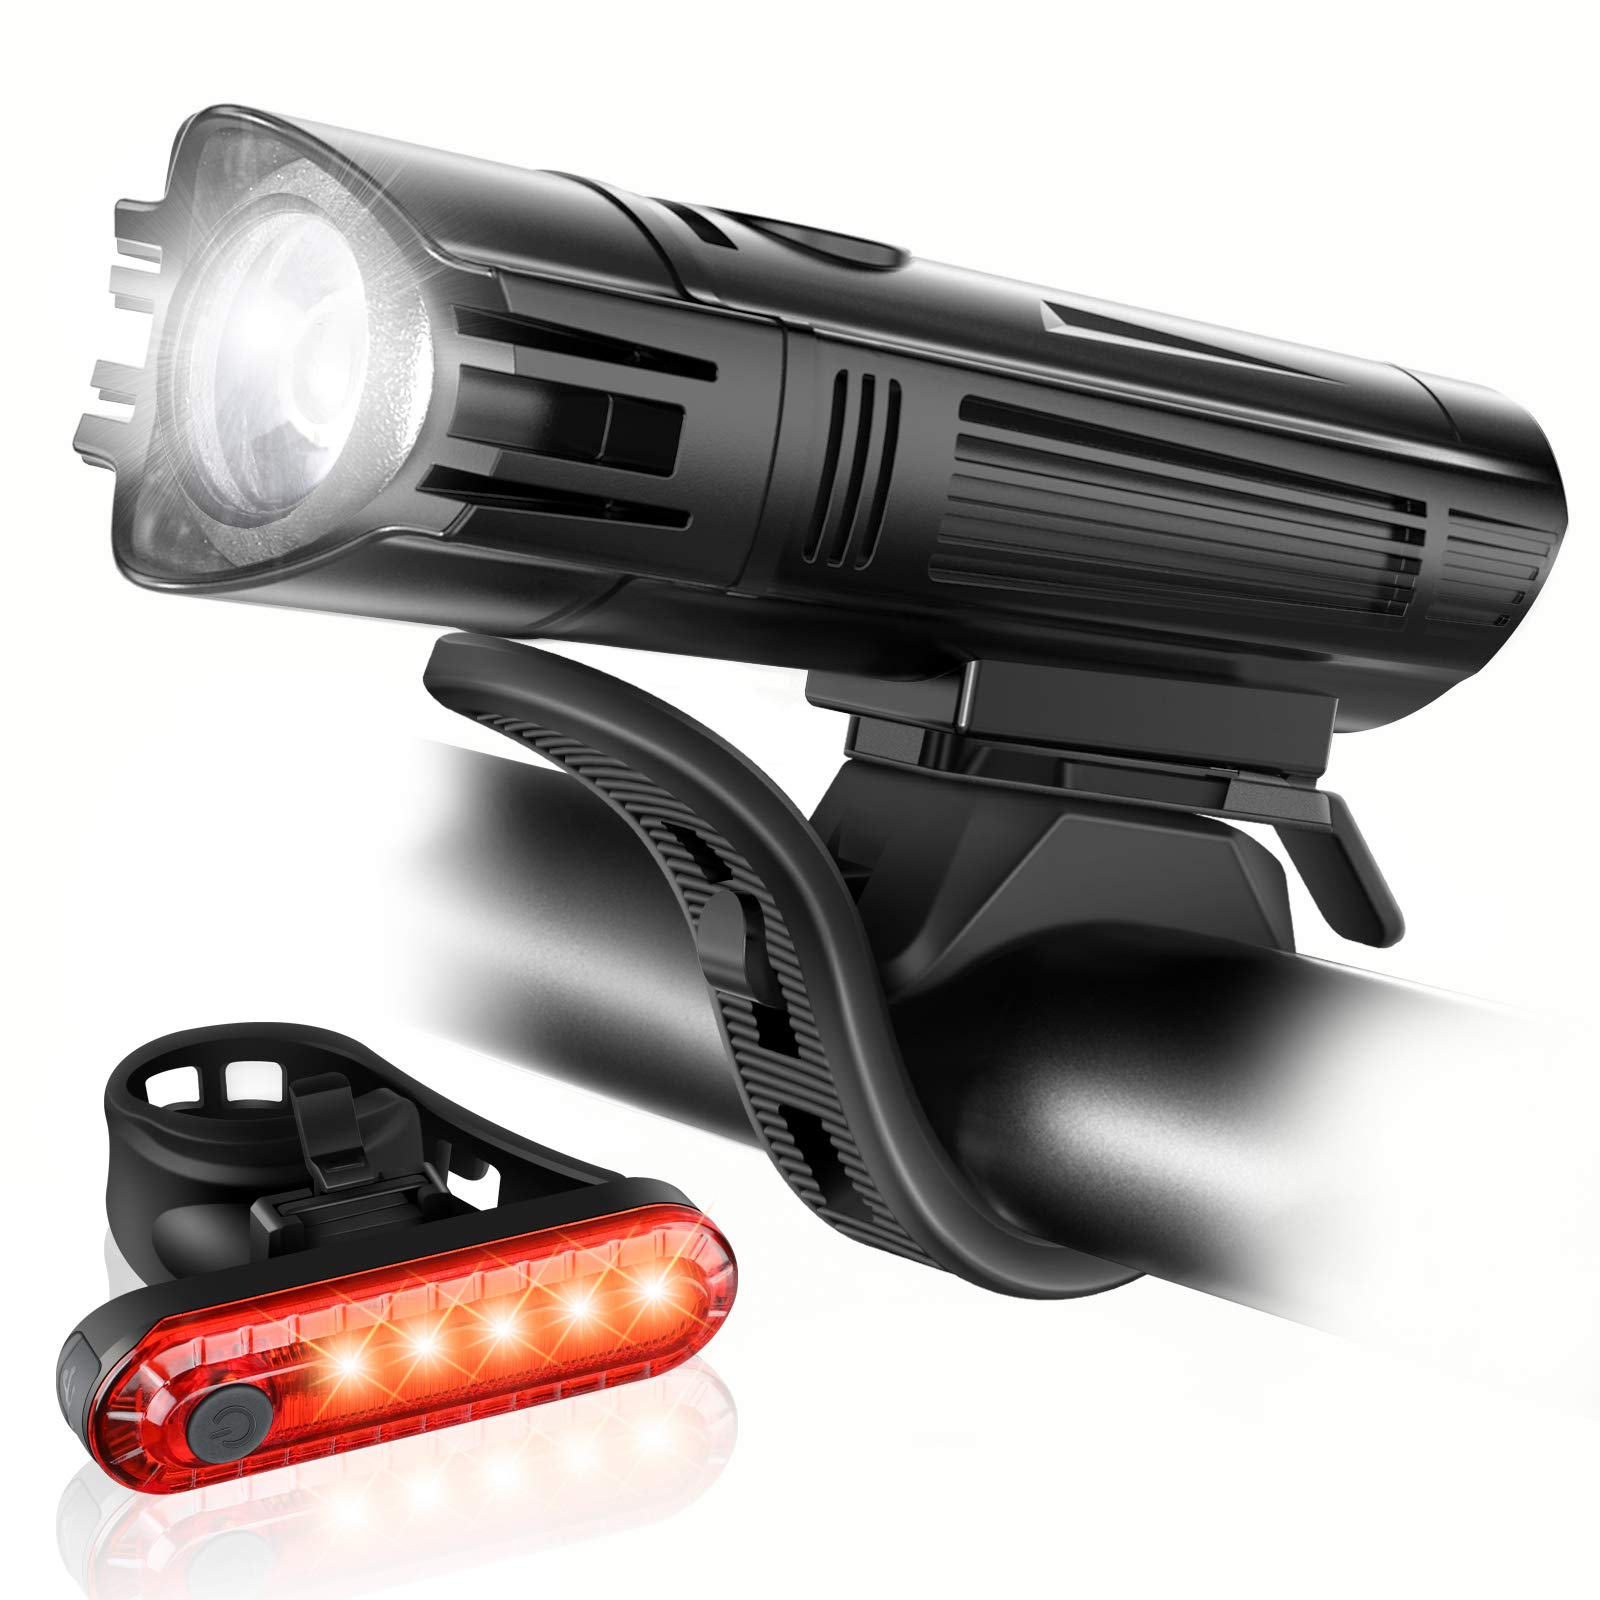 Ascher USB Rechargeable LED Bike Tail Light 2 Pack